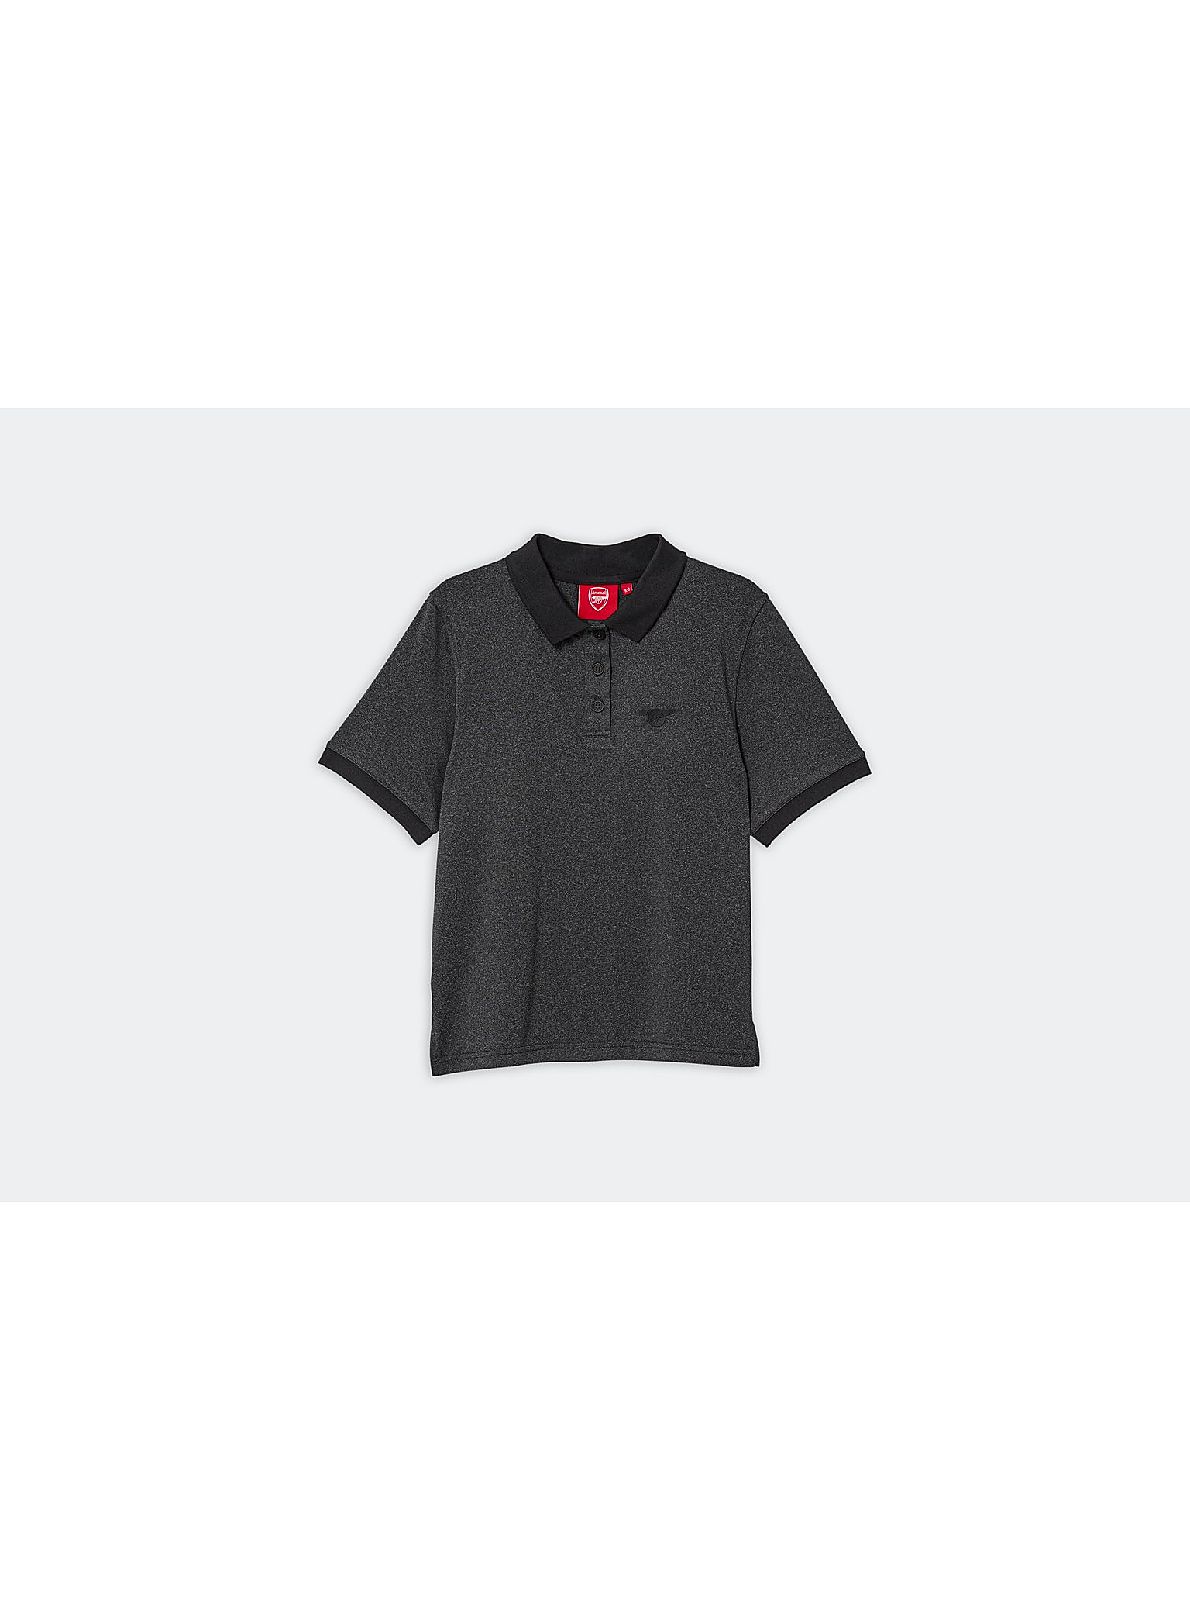 Arsenal Kids Leisure Space Dye Black Polo Shirt | Official Online Store